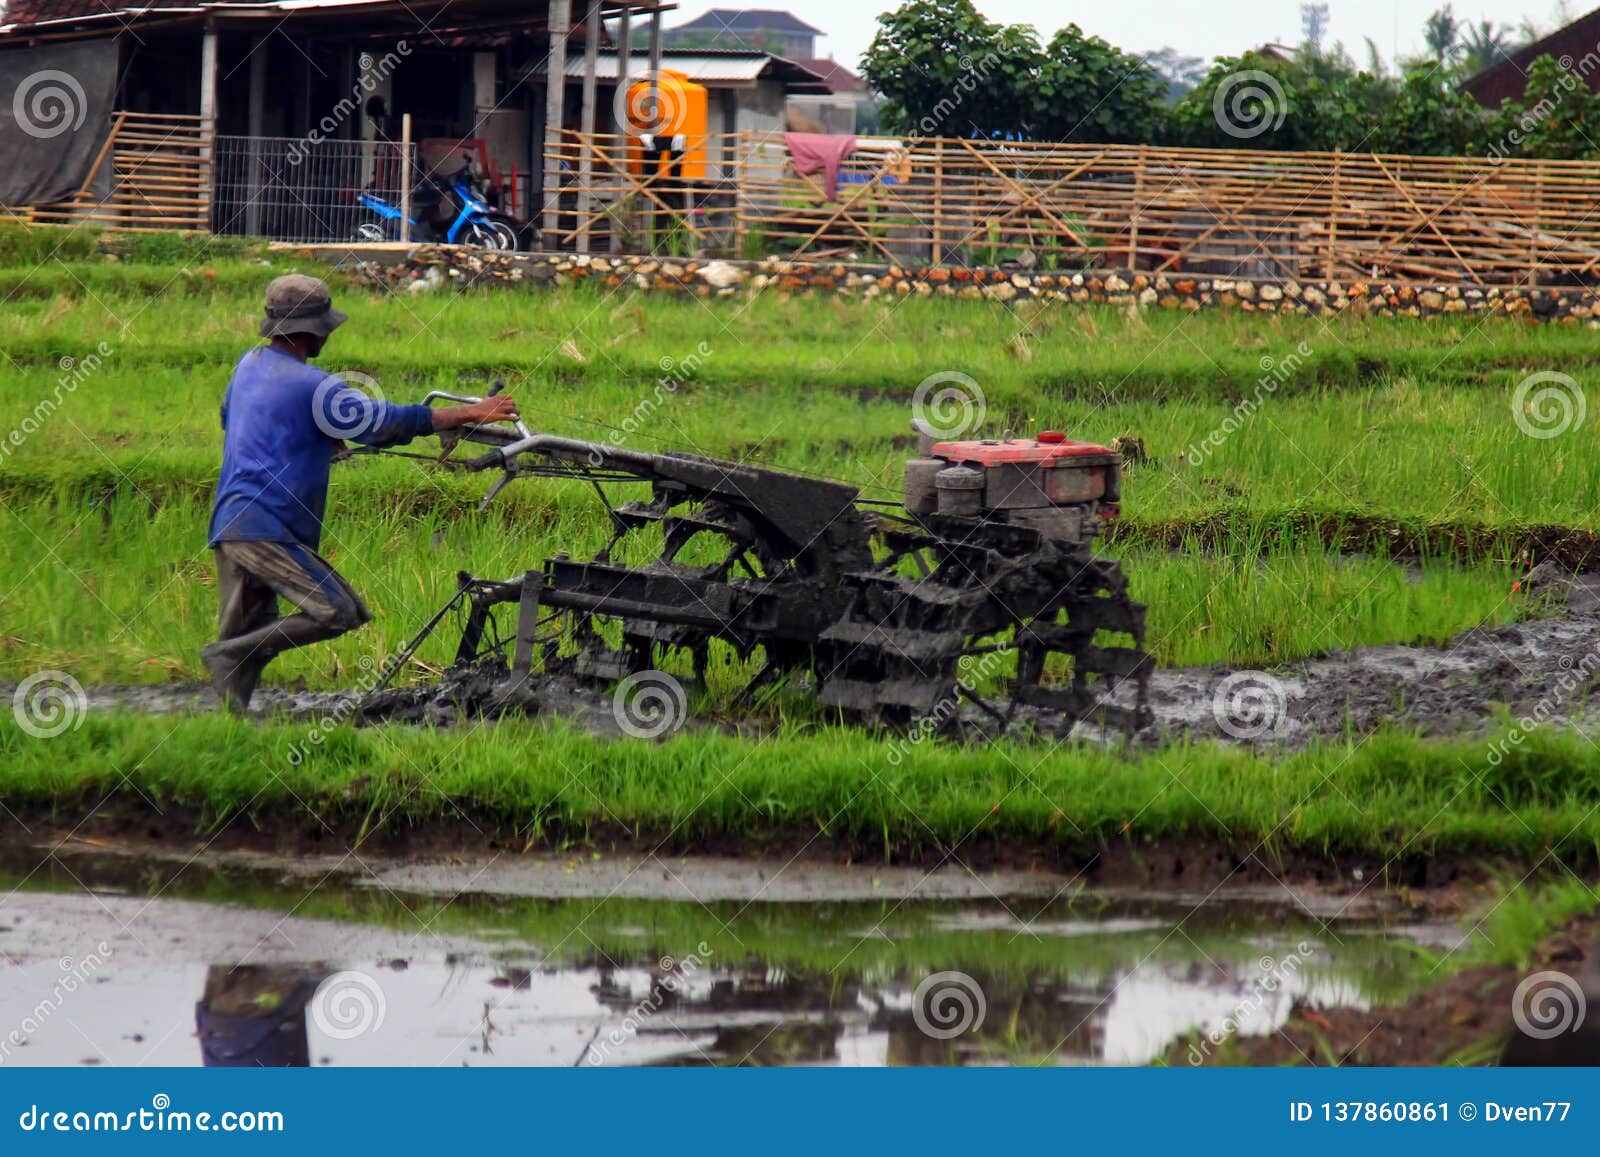 Asian Farmer Working Plowing Rice Fields Knee Deep In The Mud Stock Image Image Of Field